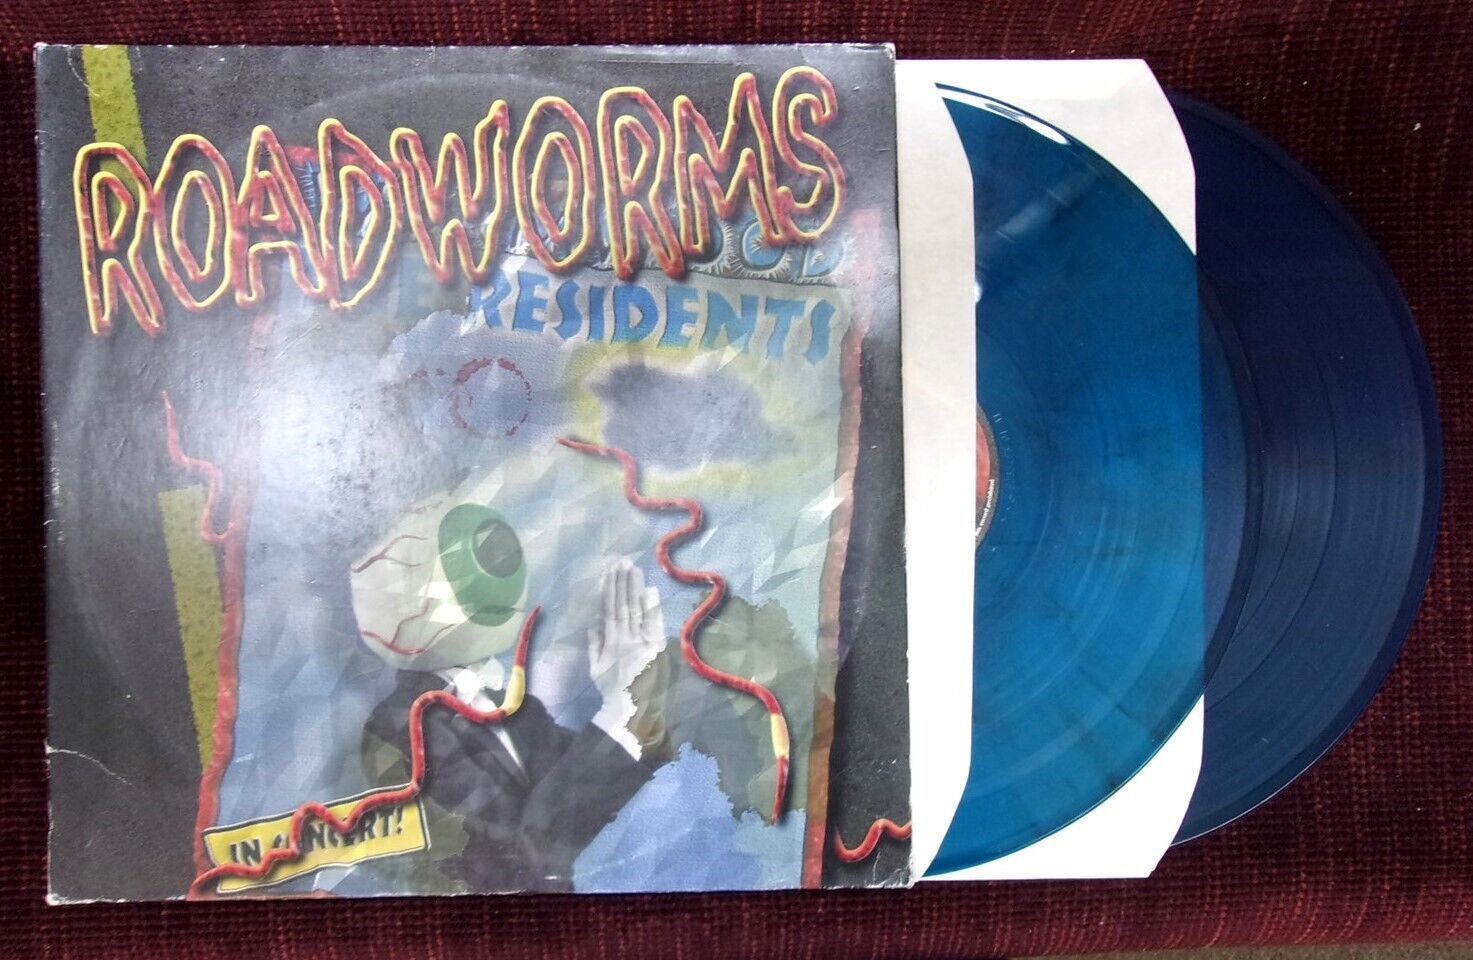 THE RESIDENTS, Roadworms The Berlin Sessions Vinyl, LP 2000 Ralph Records